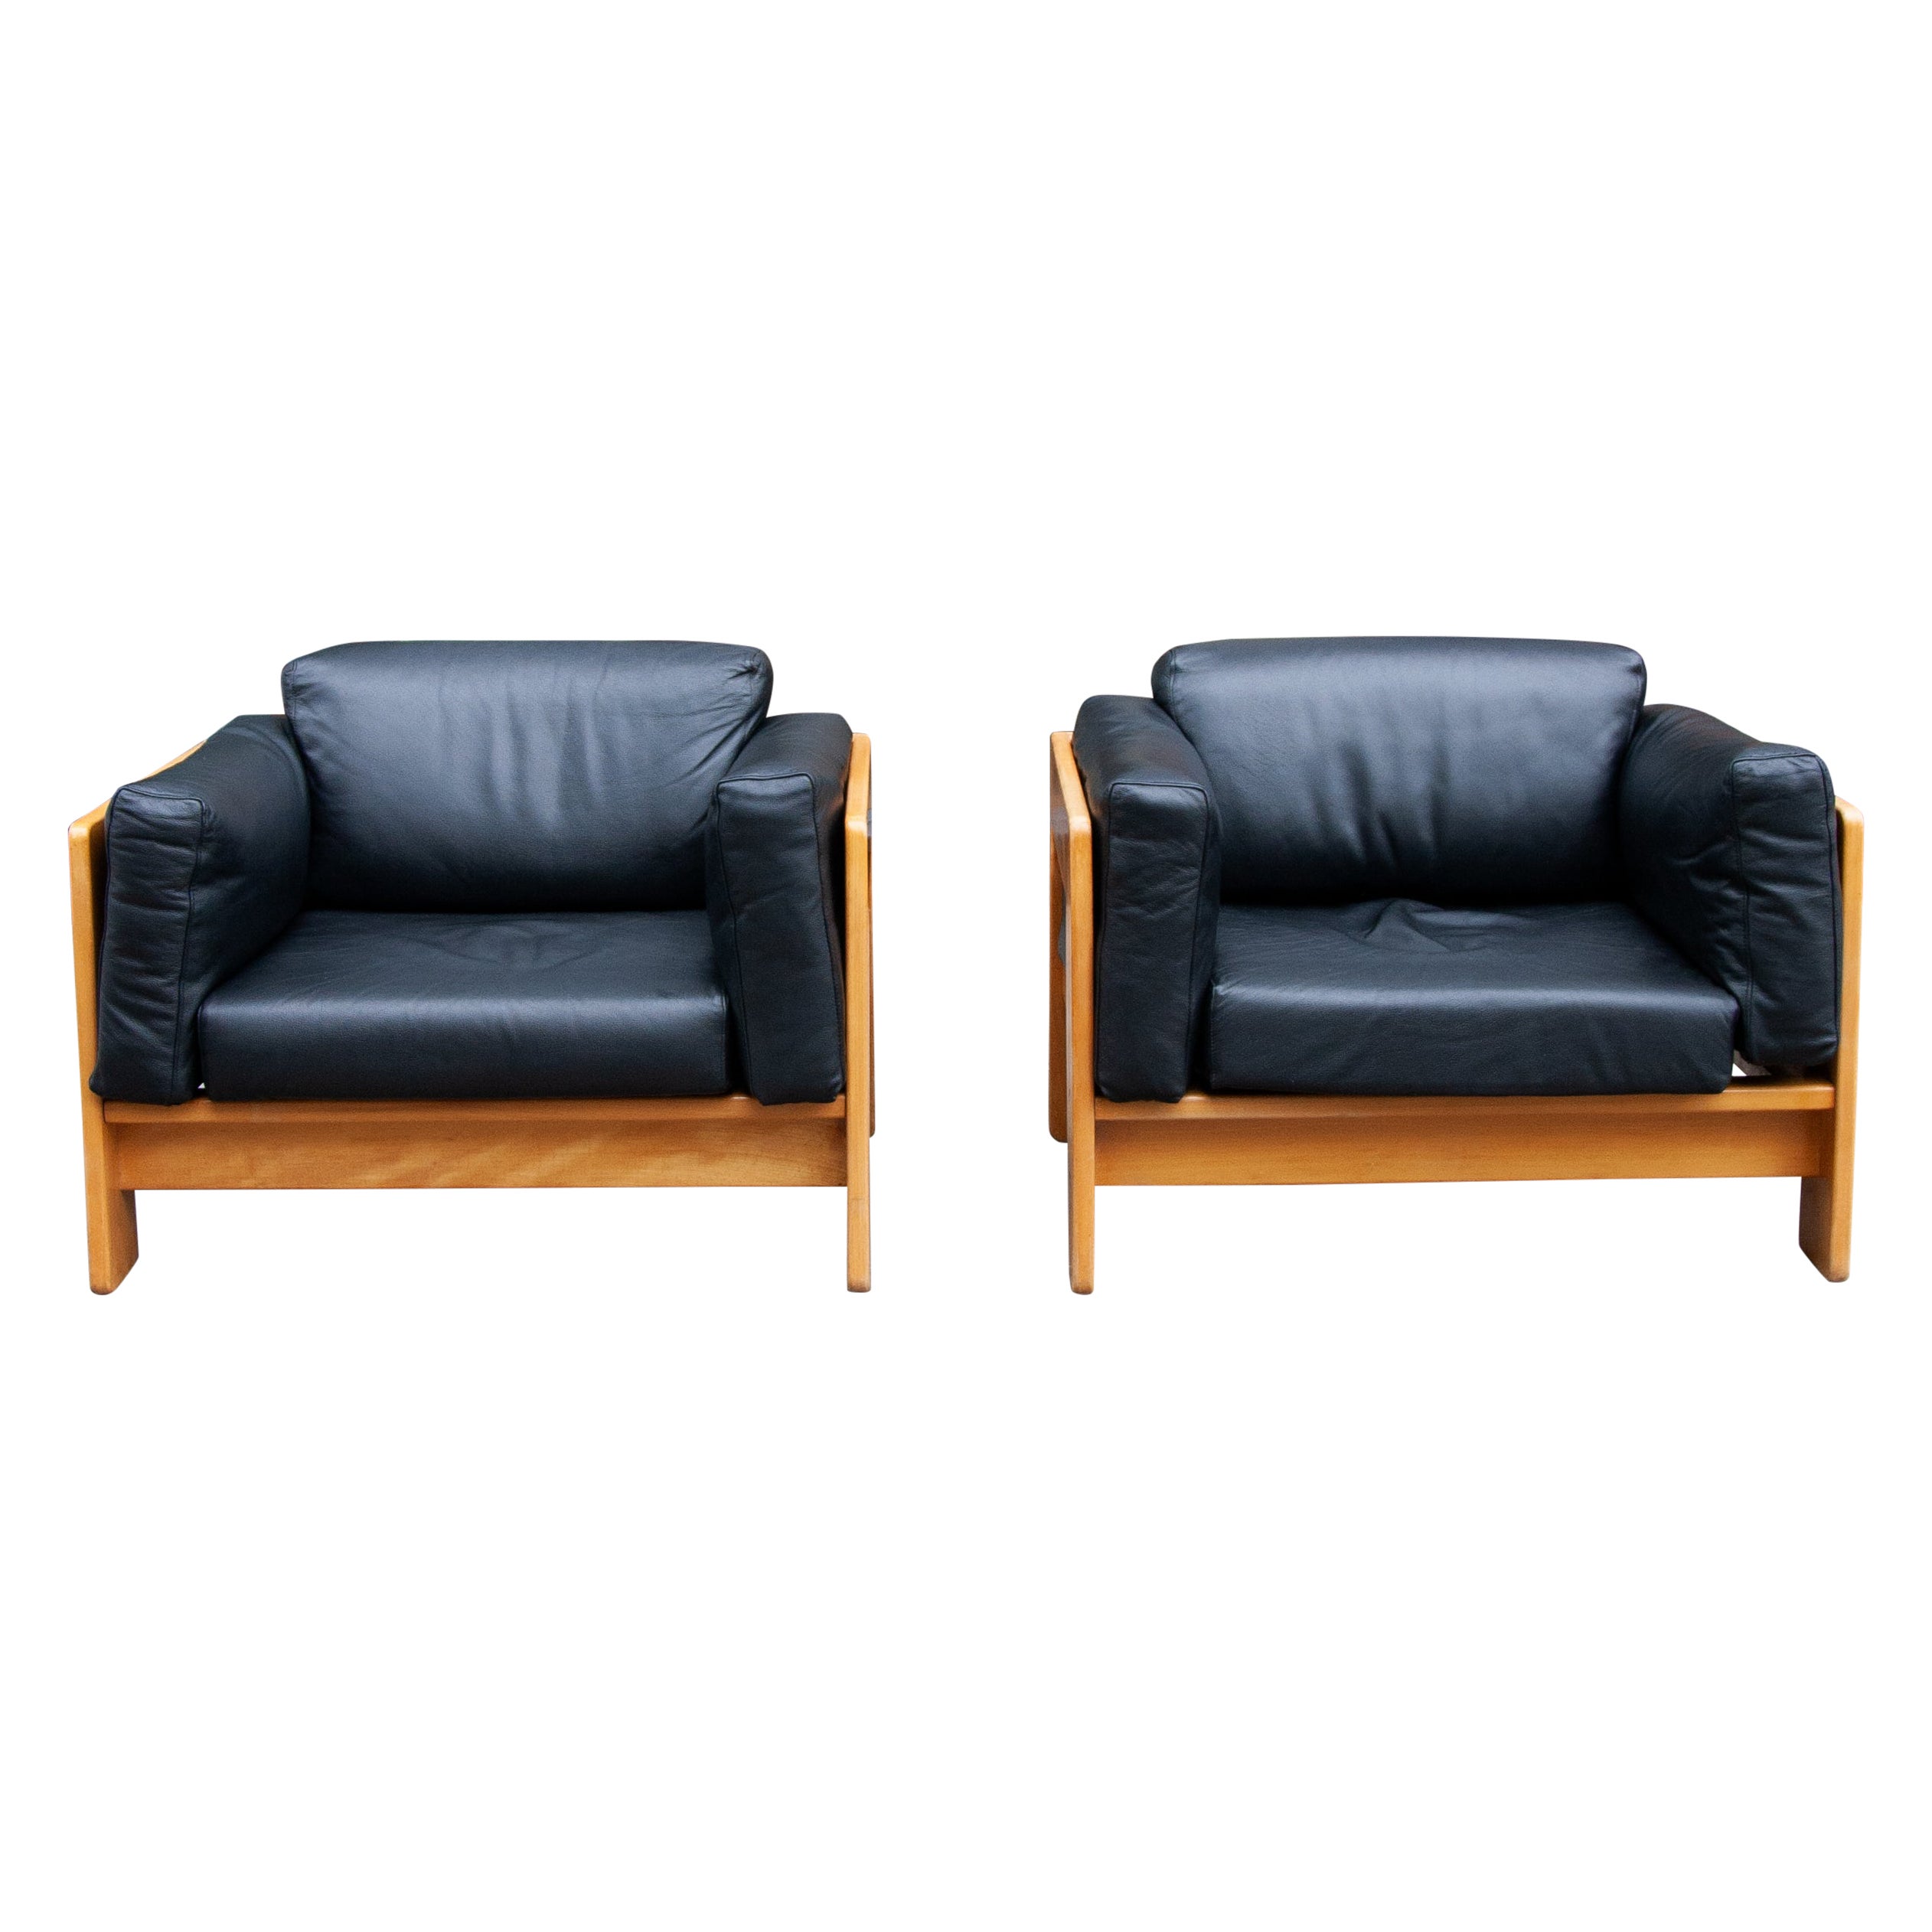 Pair of Beech 'Bastiano' Lounge Chairs, Afra & Tobia Scarpa, Italy, 1960